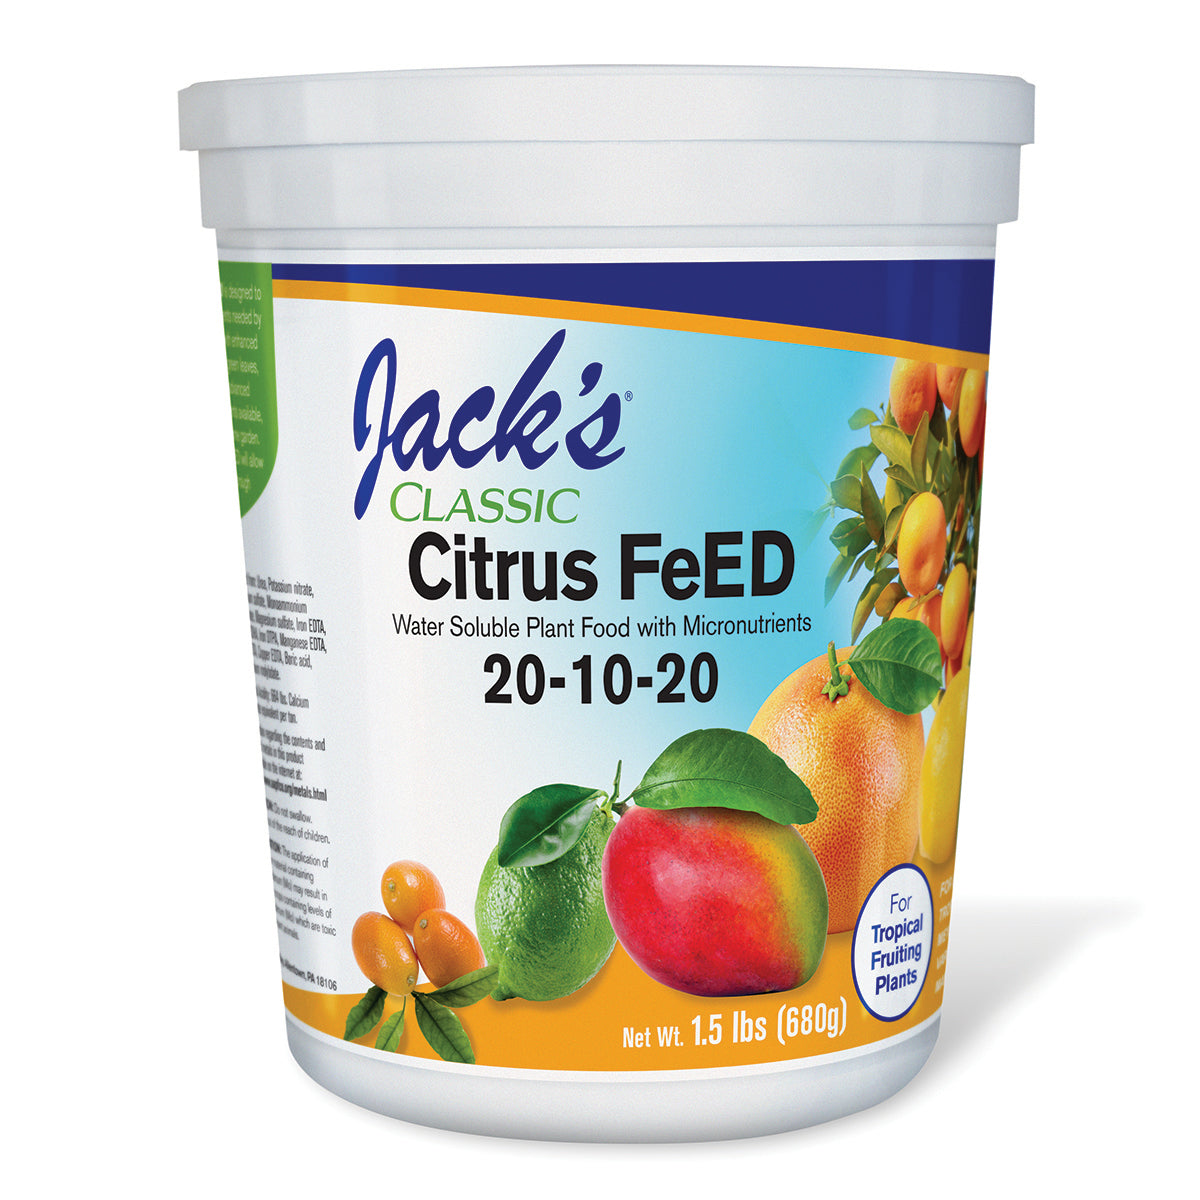 Product Image:Jack's Classic Citrus FeED 20-10-20 1.5 lb